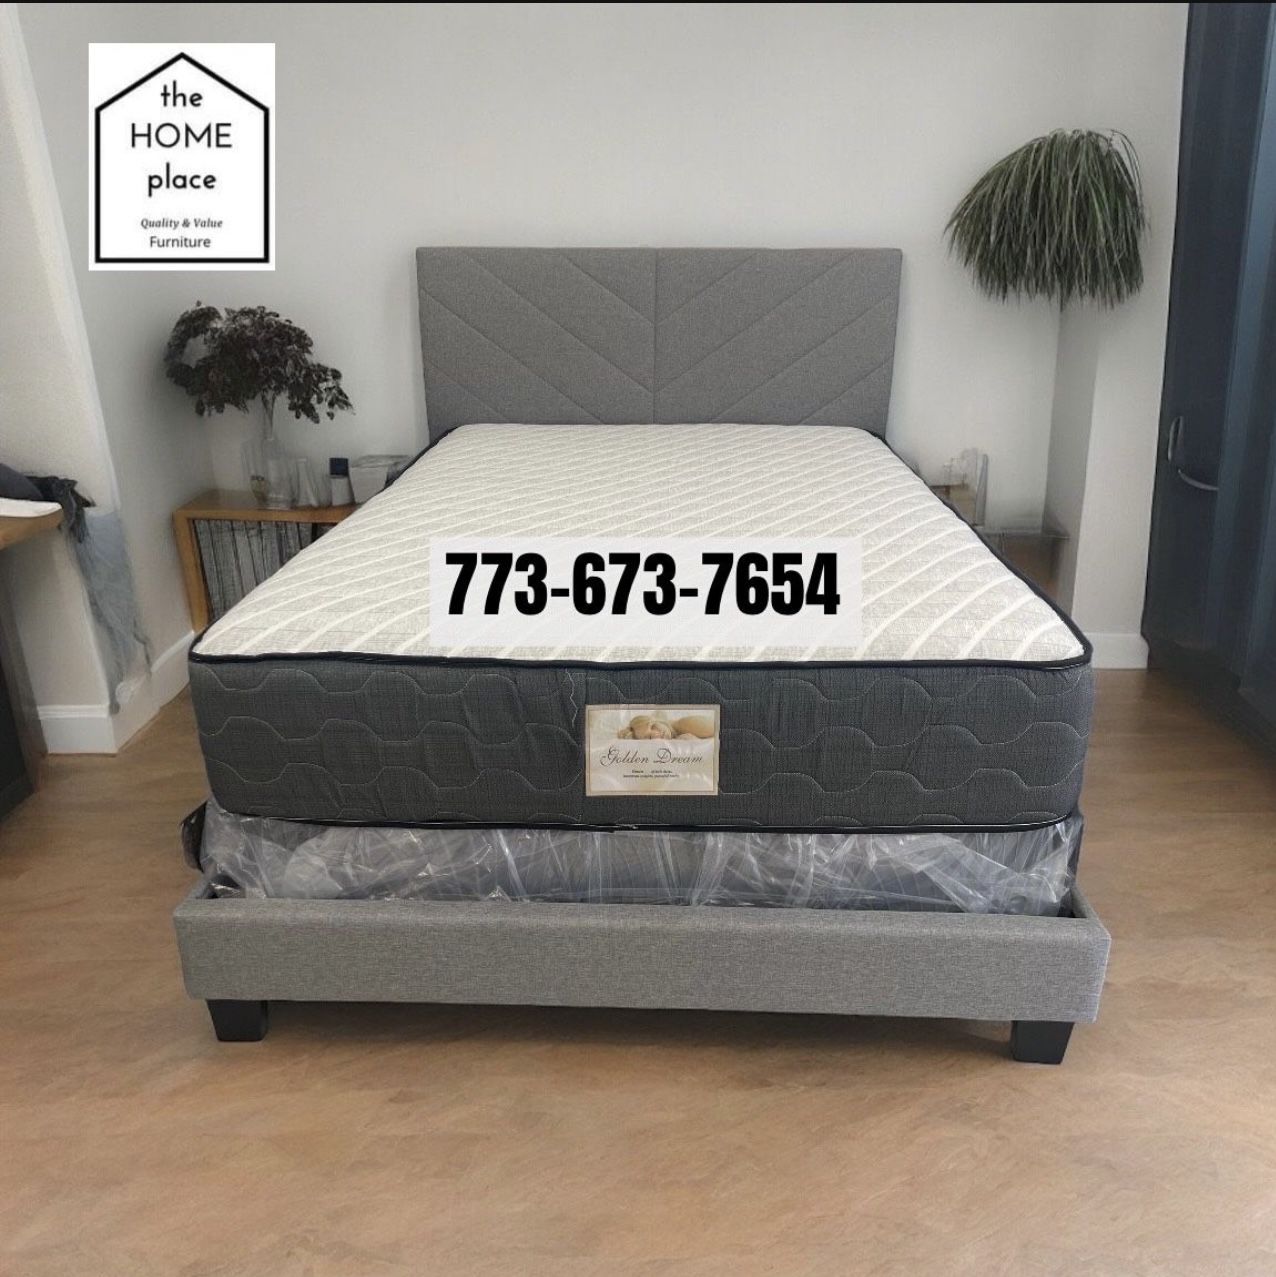 Comfort & Elegant Queen Bed Frame ‼️ Includes Mattress And Box Spring For Only $349 Ready For Delivery Today 🚛 